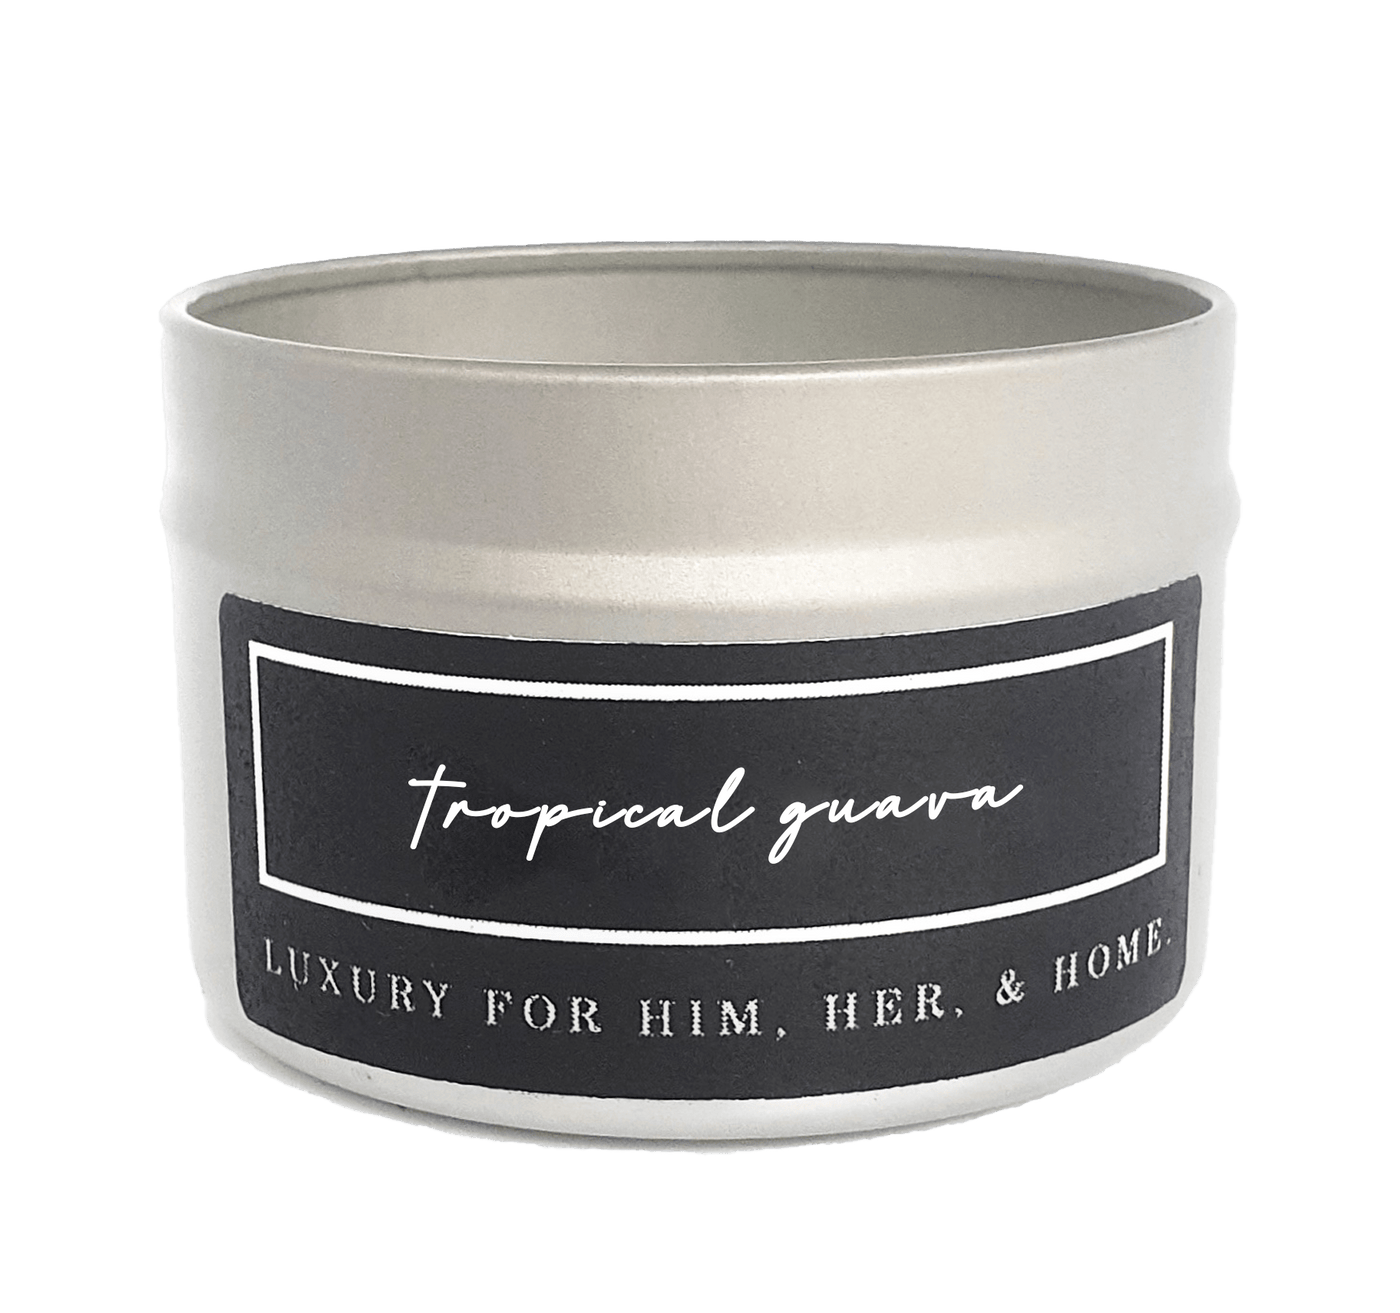 Tropical Guava - Black Luxe Candle Co.